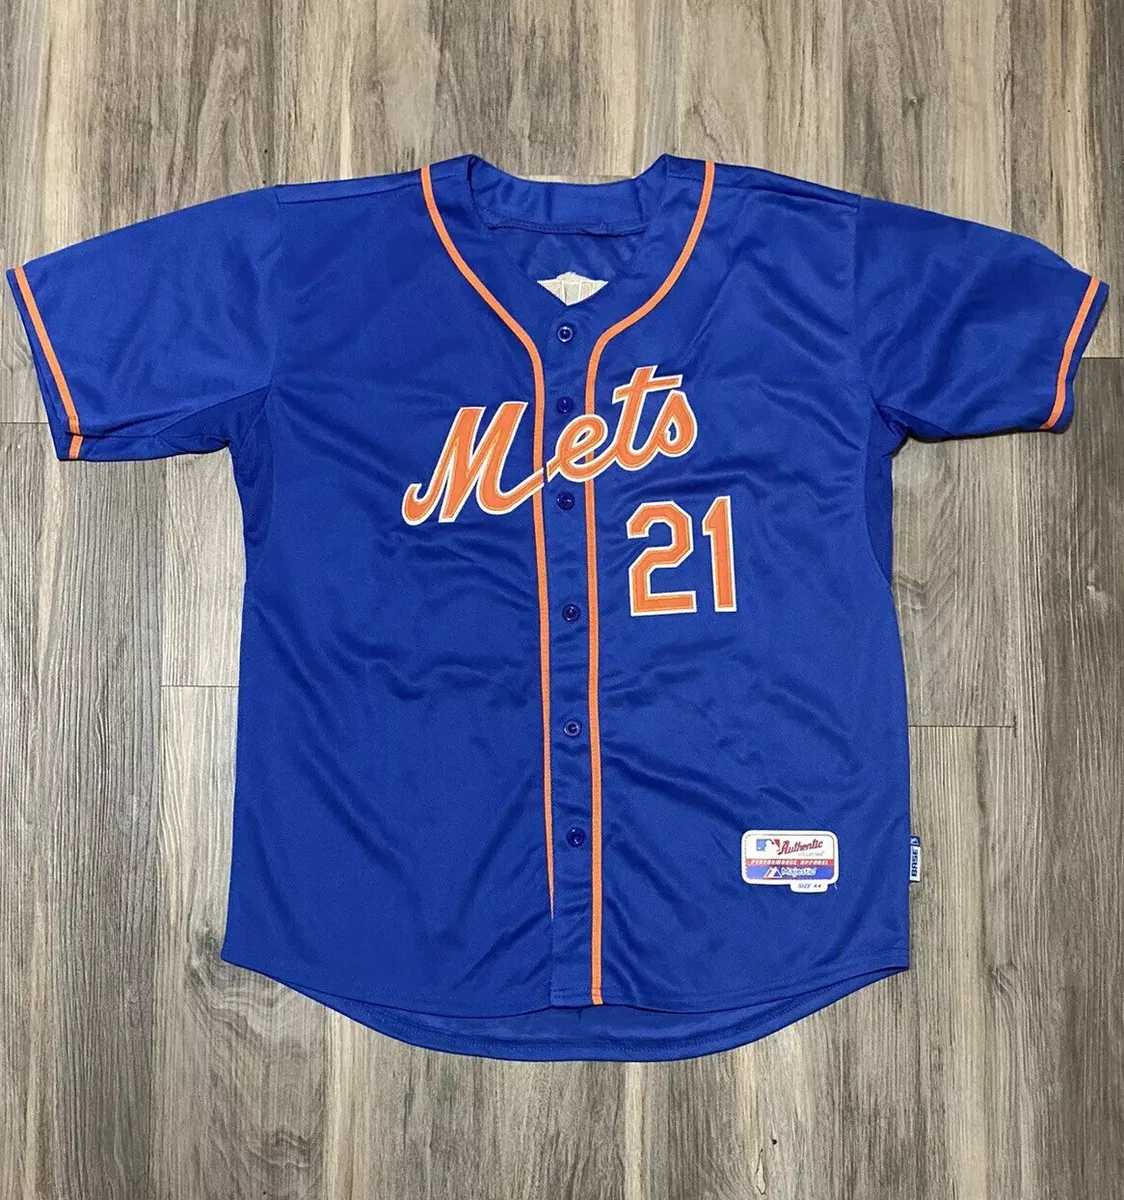 LUCAS DUDA #21 Majestic Official Cool Base NY Mets MLB Jersey Men’s Size 44